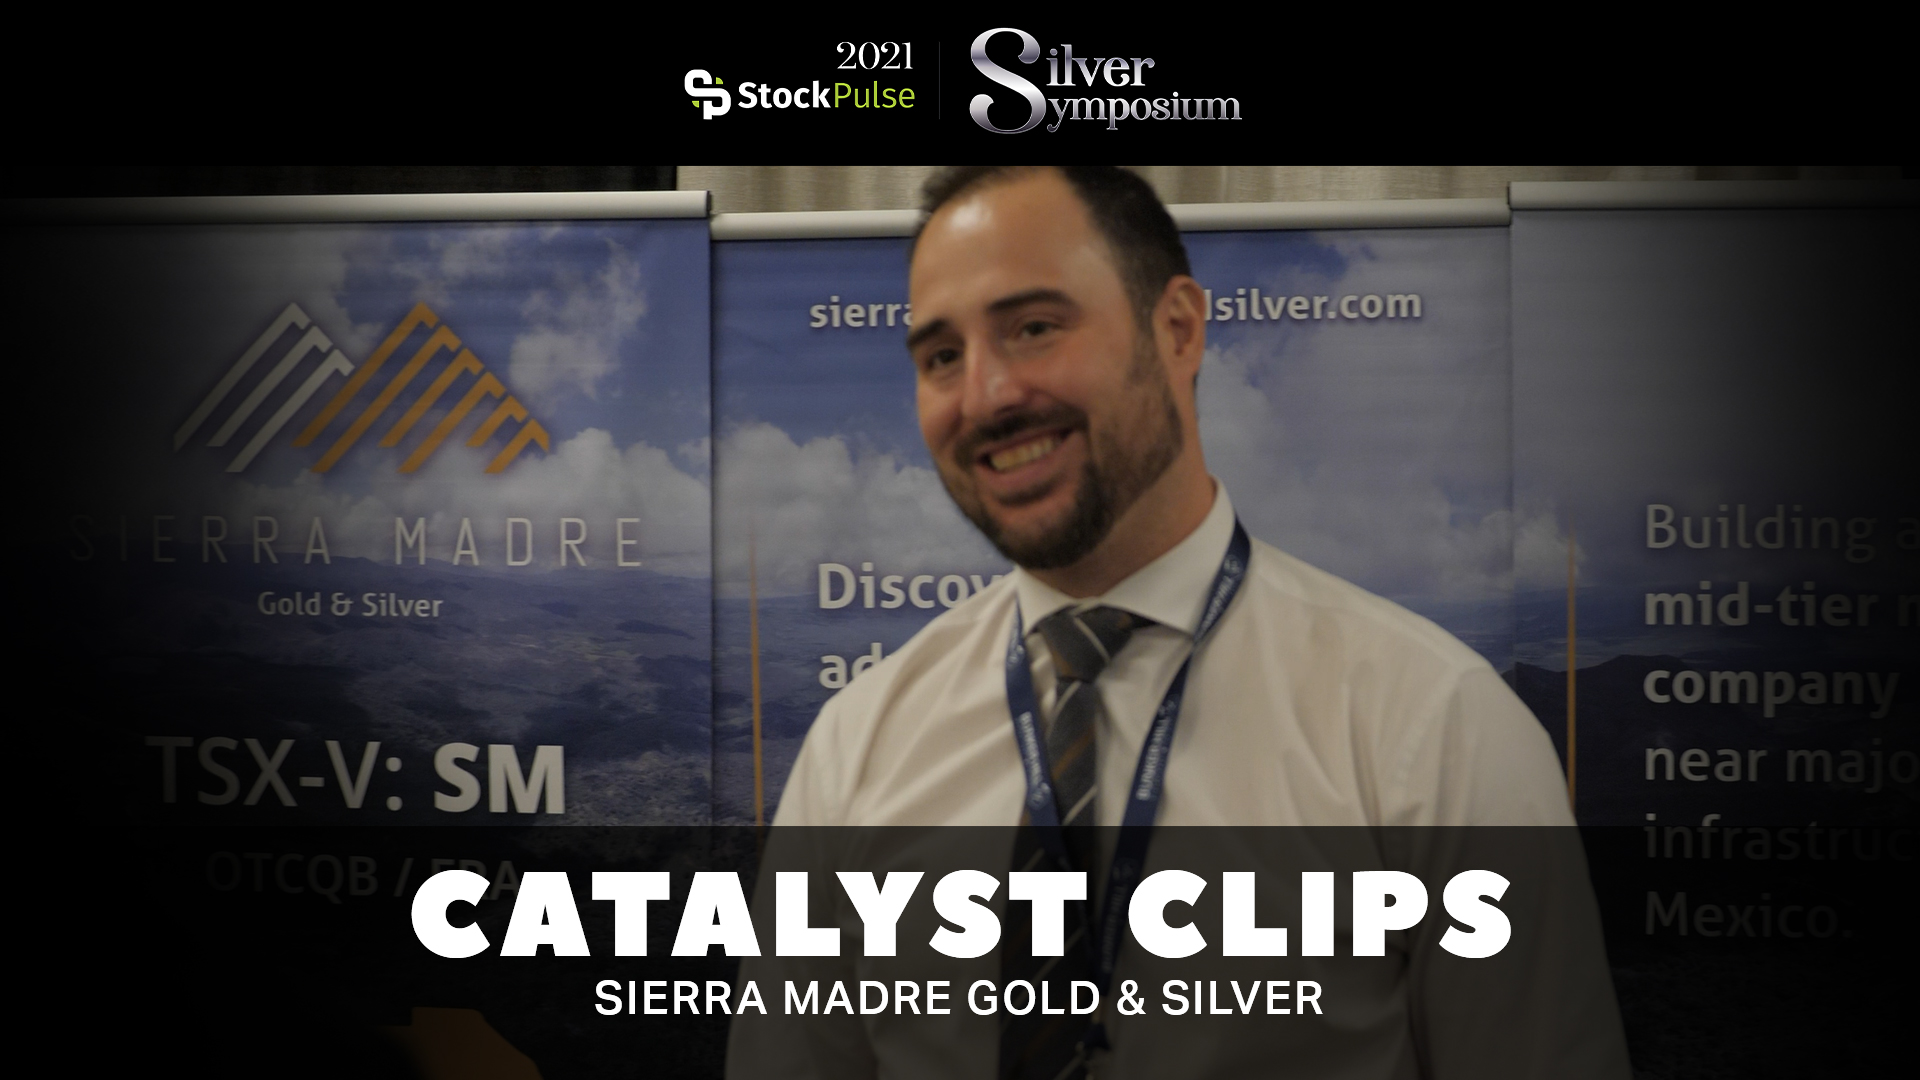 2021 StockPulse Silver Symposium Catalyst Clips | Alex Langer of Sierra Madre Gold & Silver